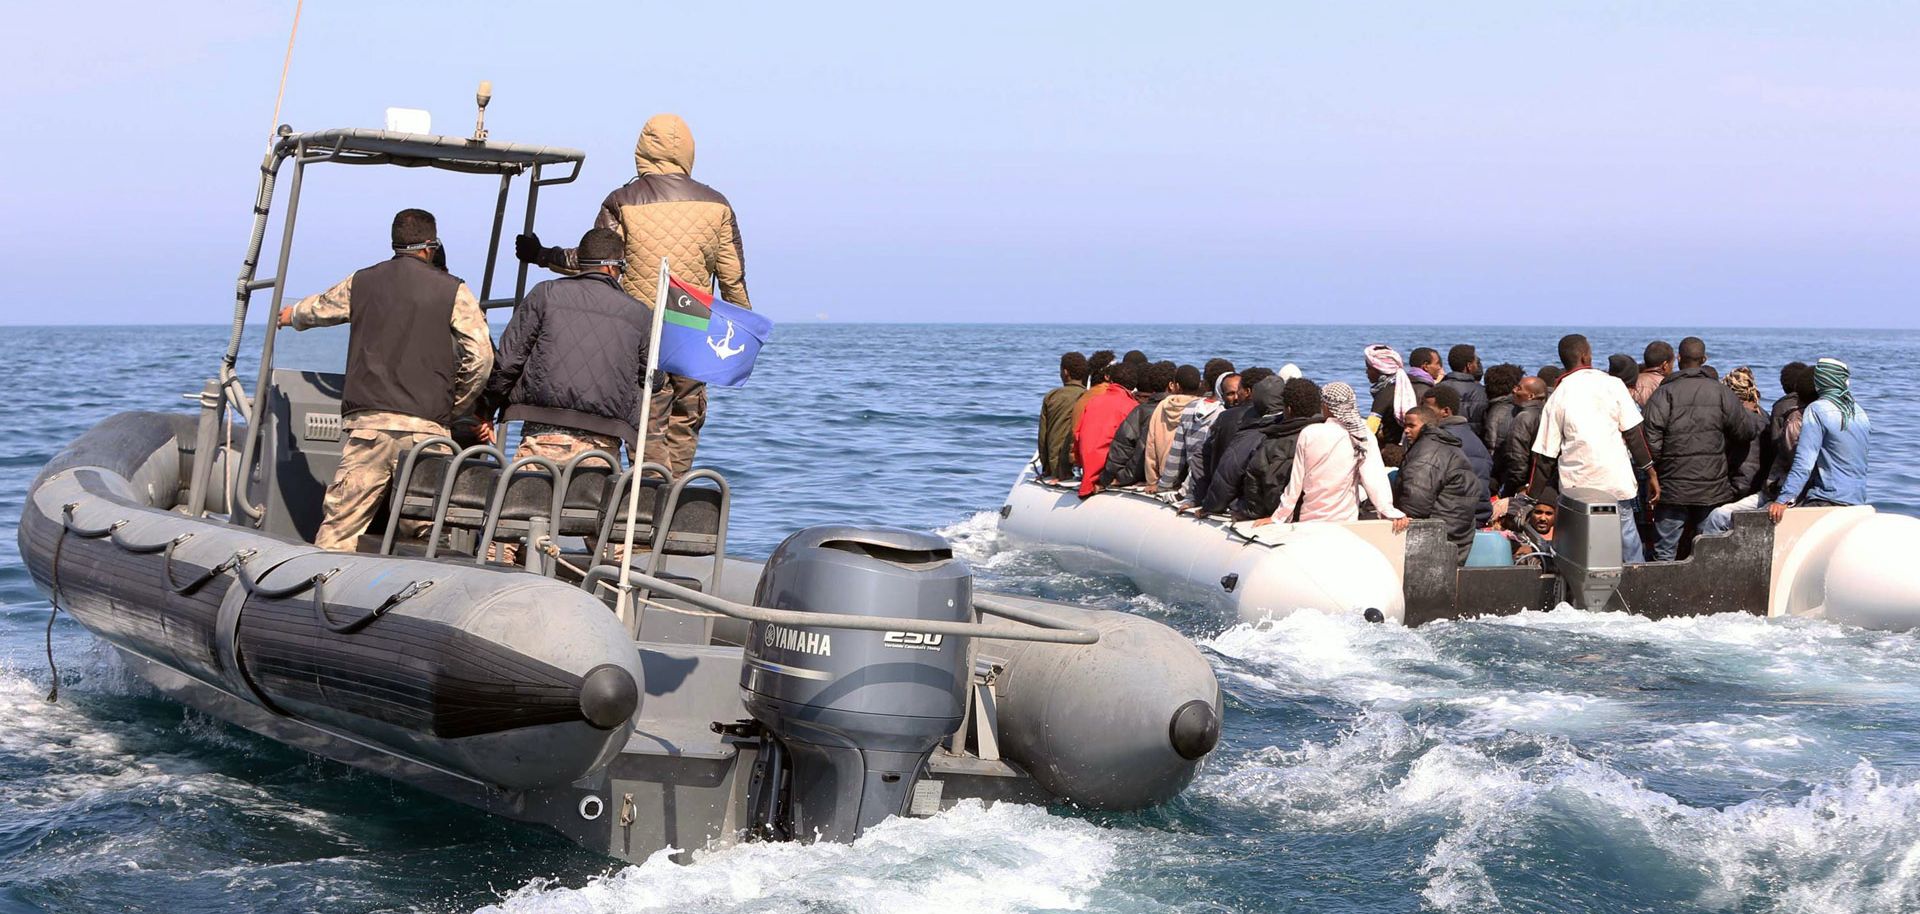 Libyan coast guard vessels detain a boat carrying migrants hoping to enter Europe illegally.